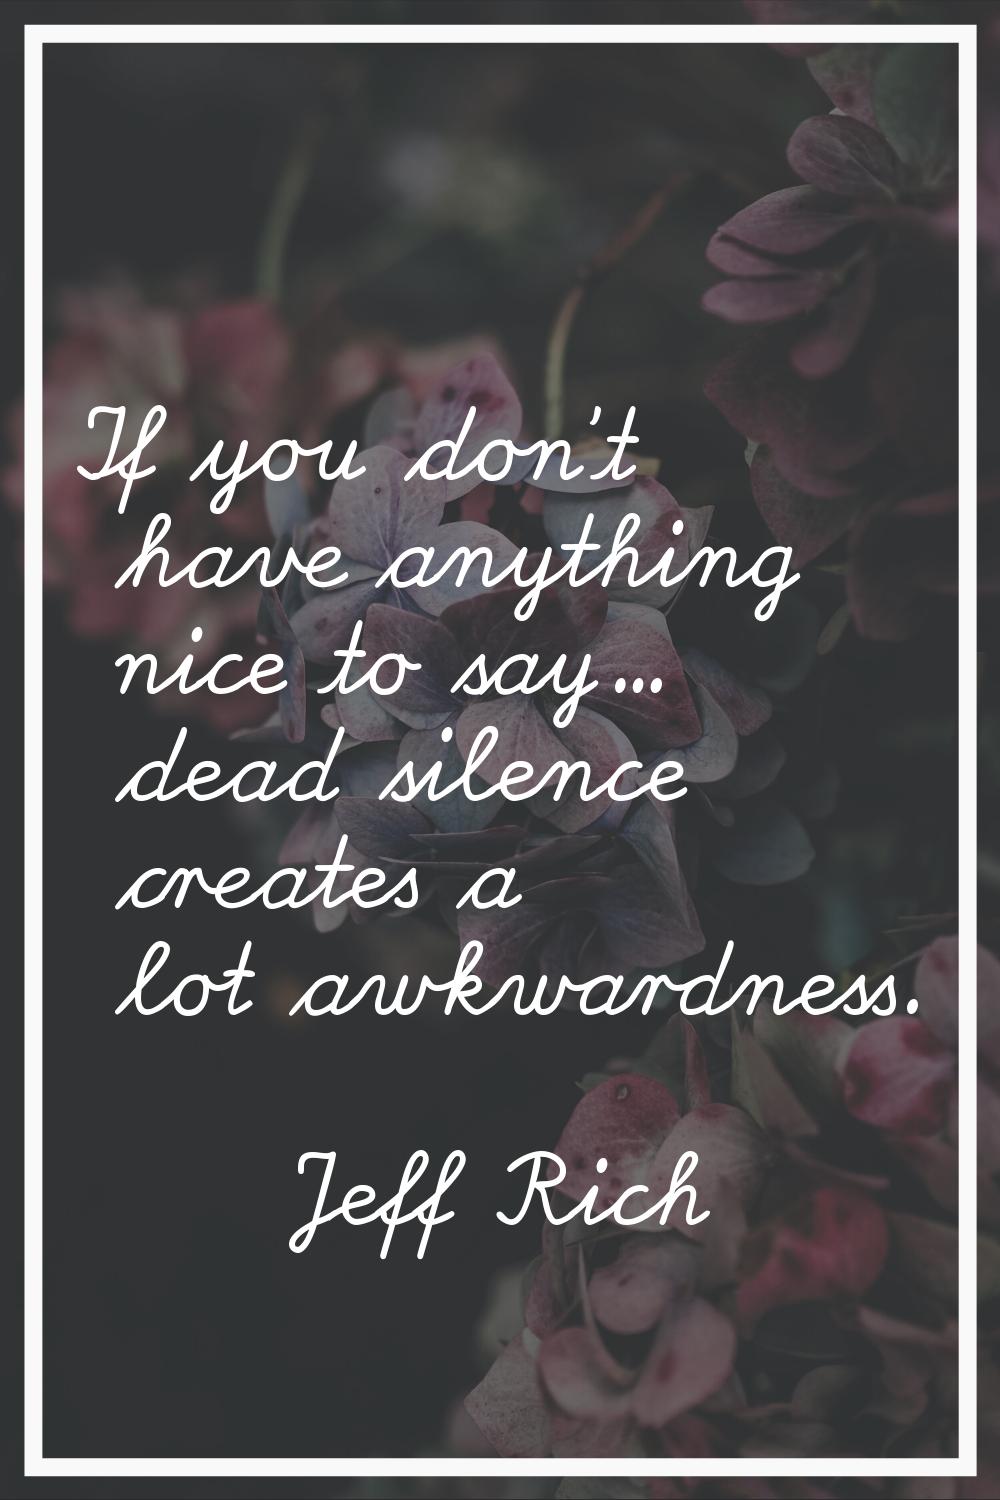 If you don't have anything nice to say... dead silence creates a lot awkwardness.